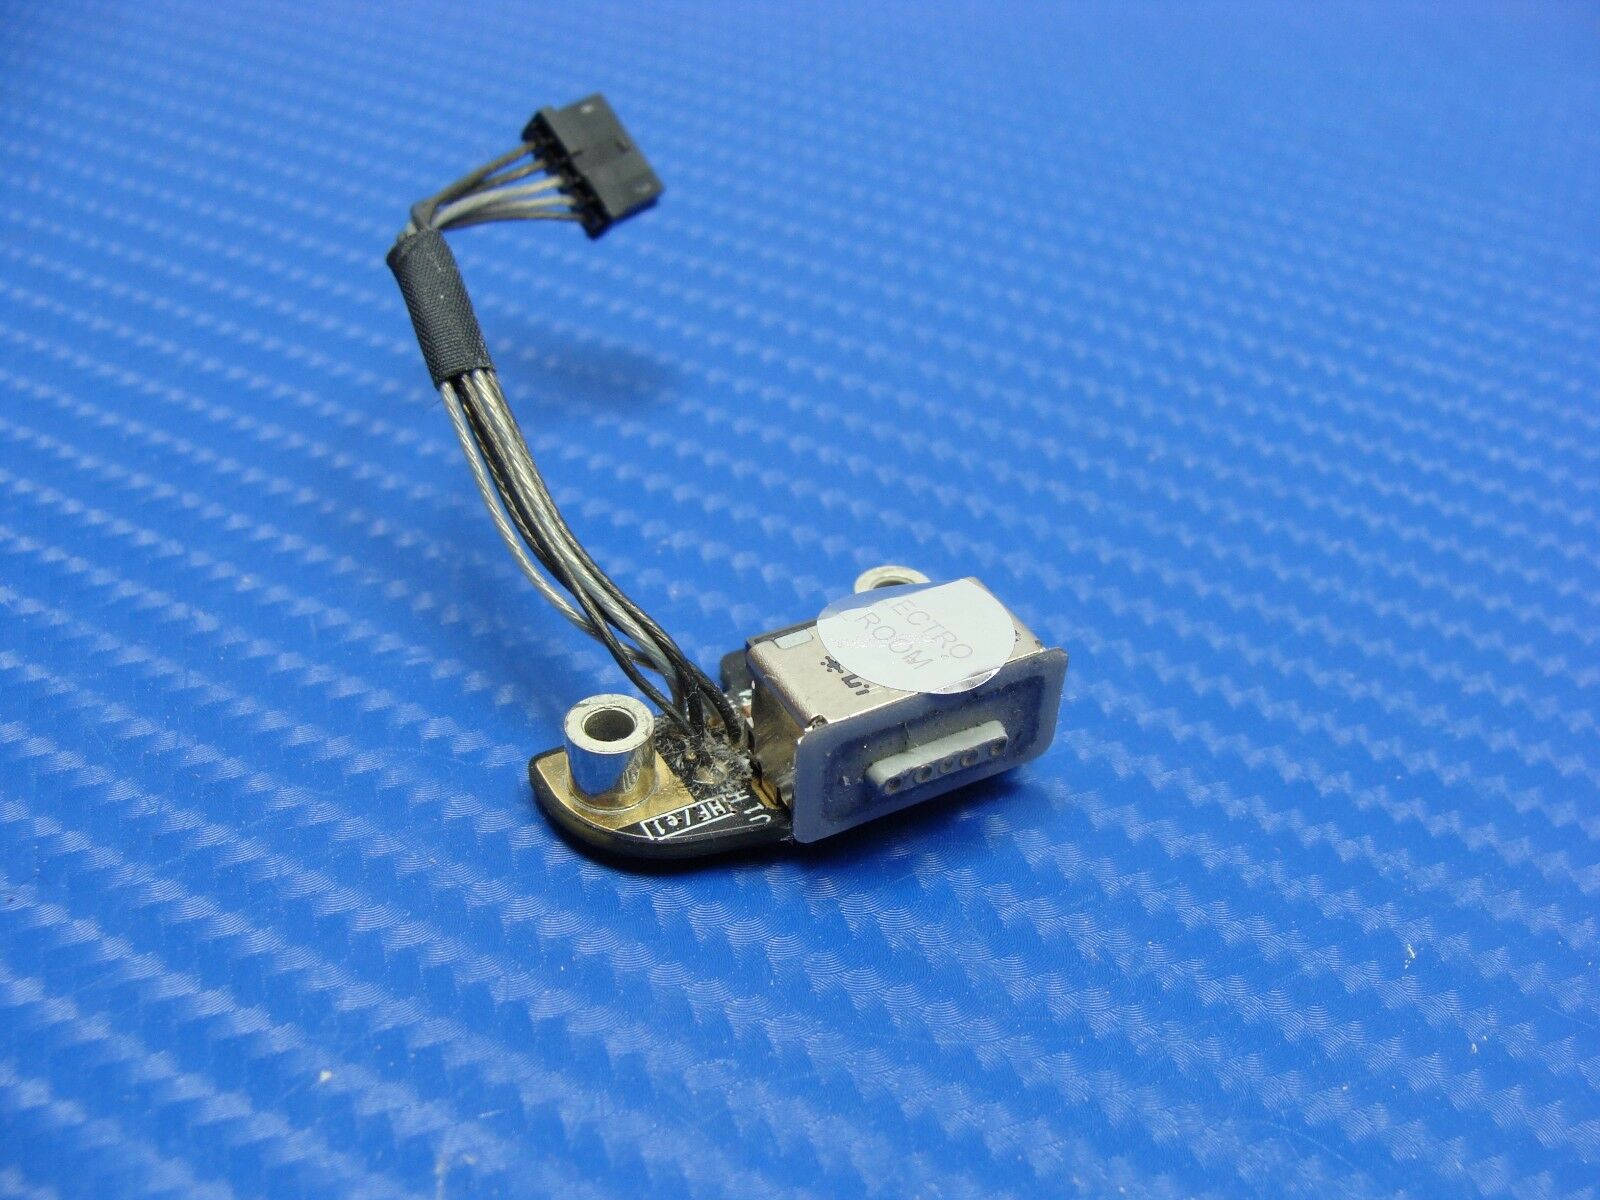 MacBook Pro A1286 15" 2008 MB471LL/A Genuine Magsafe Board 661-4950 Apple